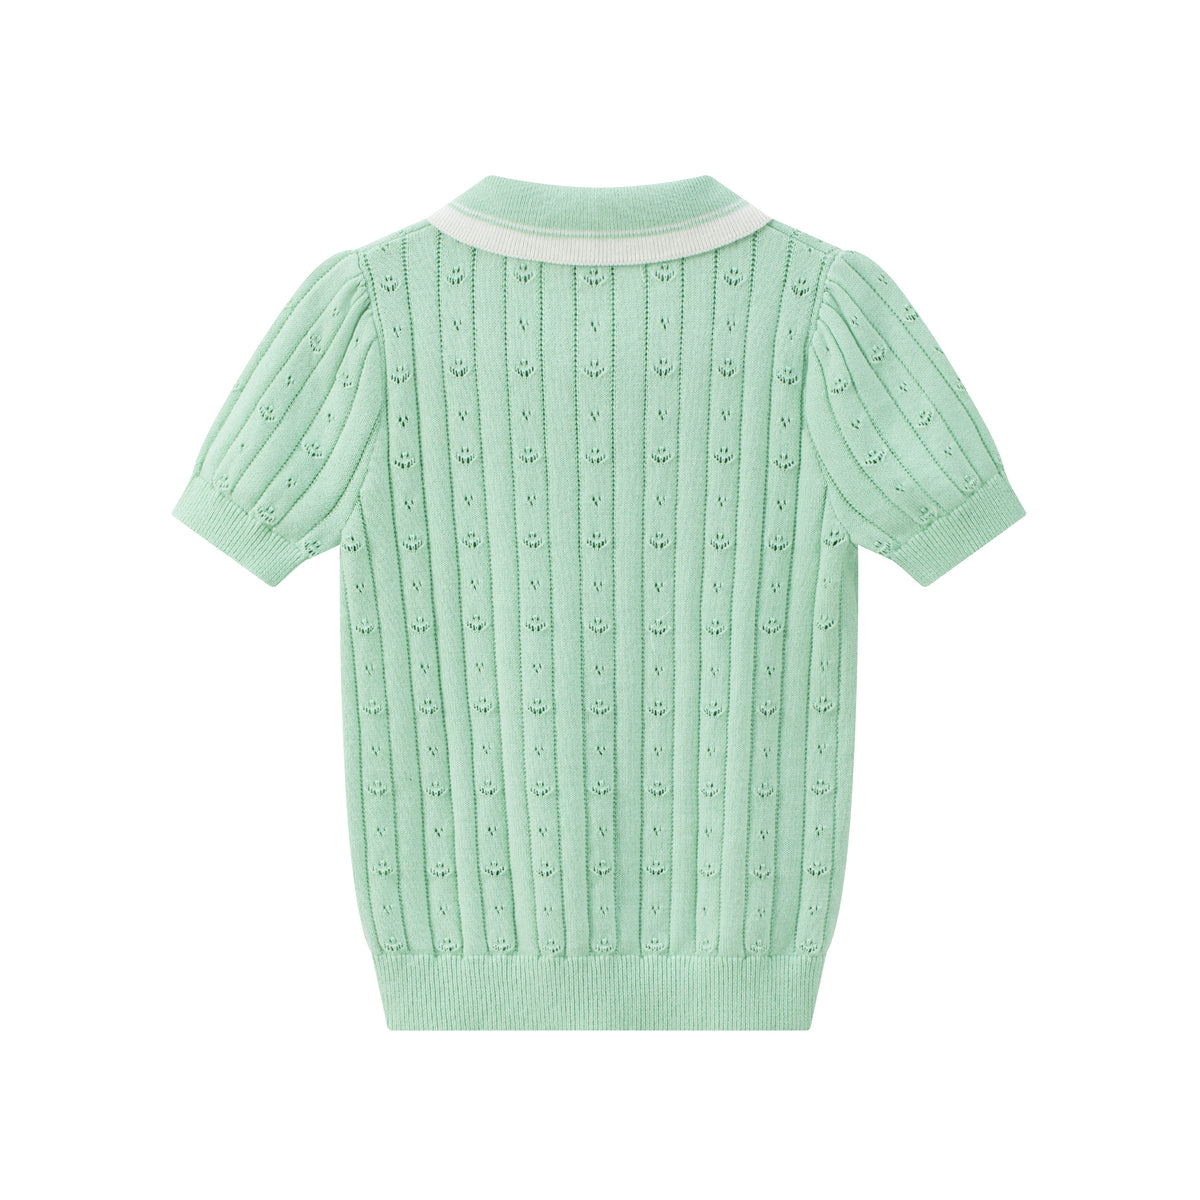 Vauva SS24 - Girls Knitted Polo Sweater (Pastel Green)